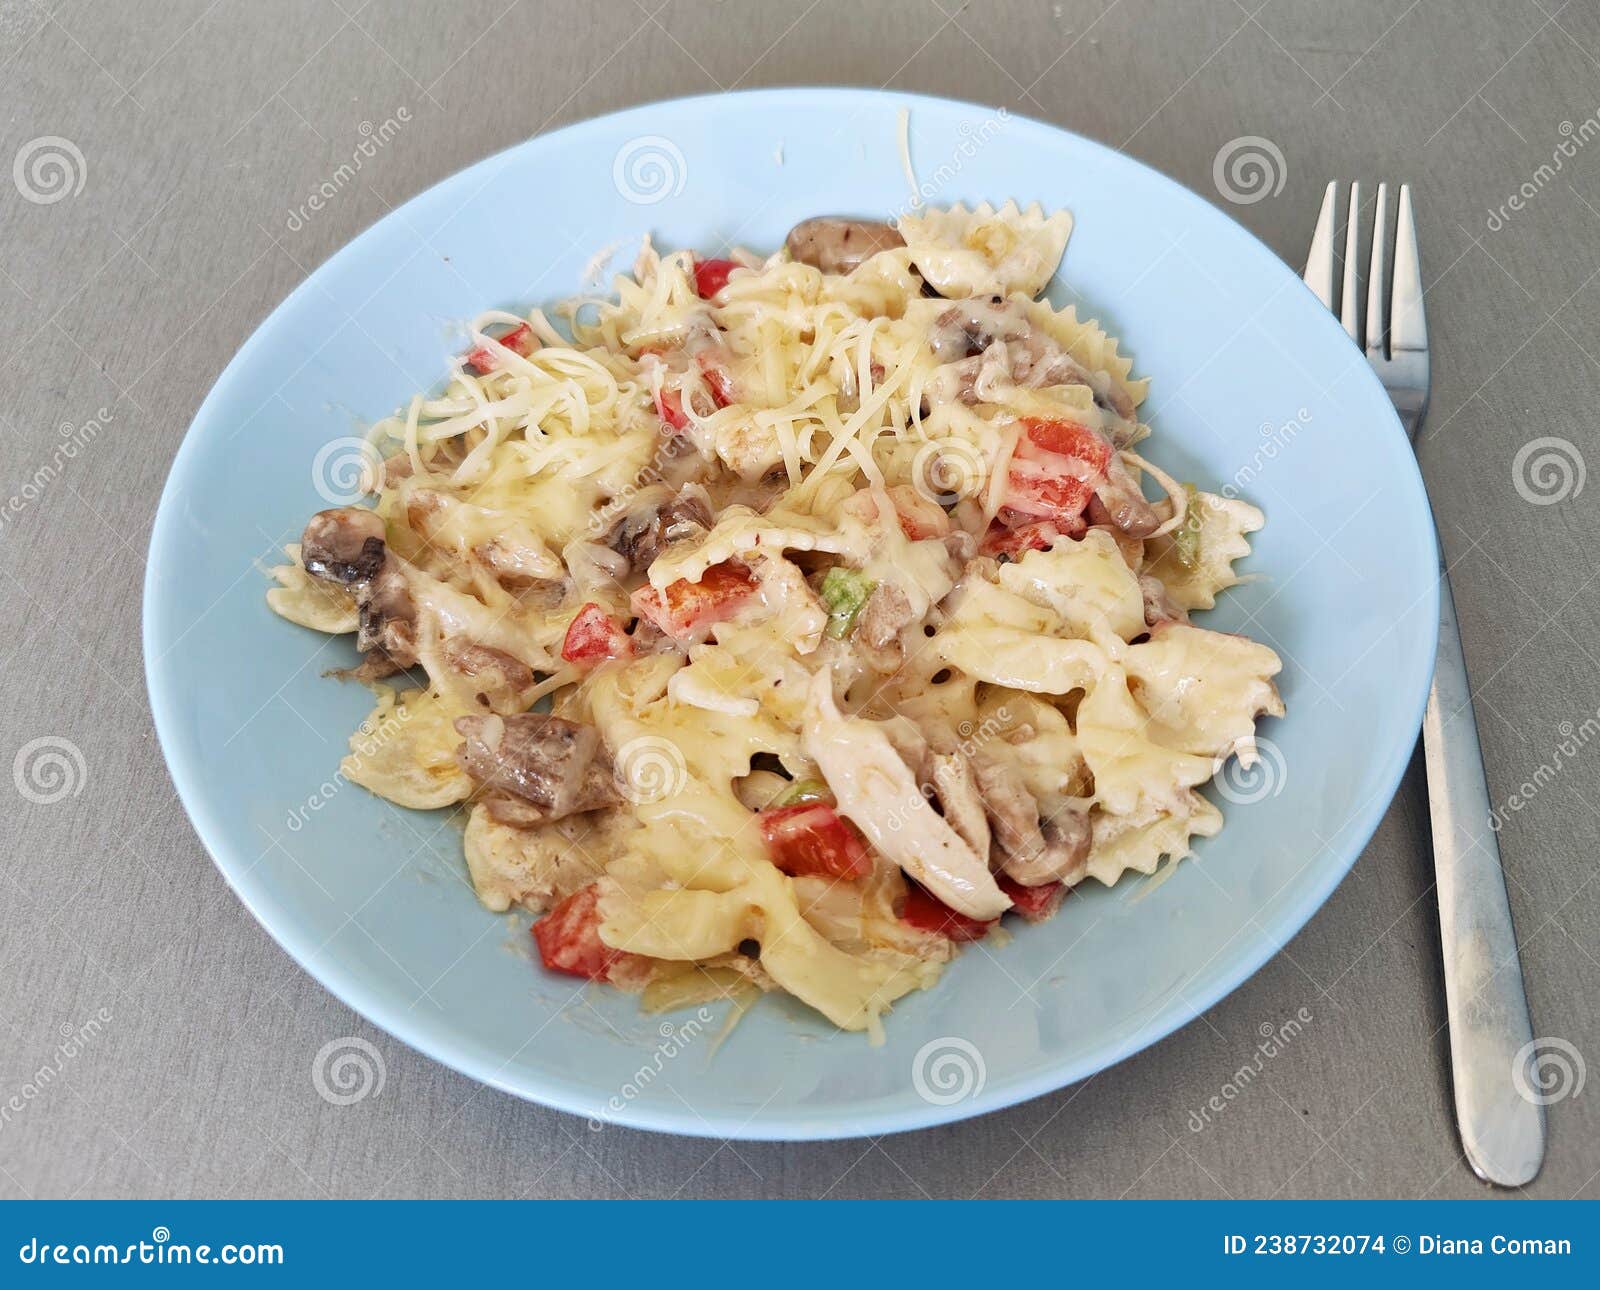 Pasta with Chicken and Cream Sauce Stock Photo - Image of creamy, dish